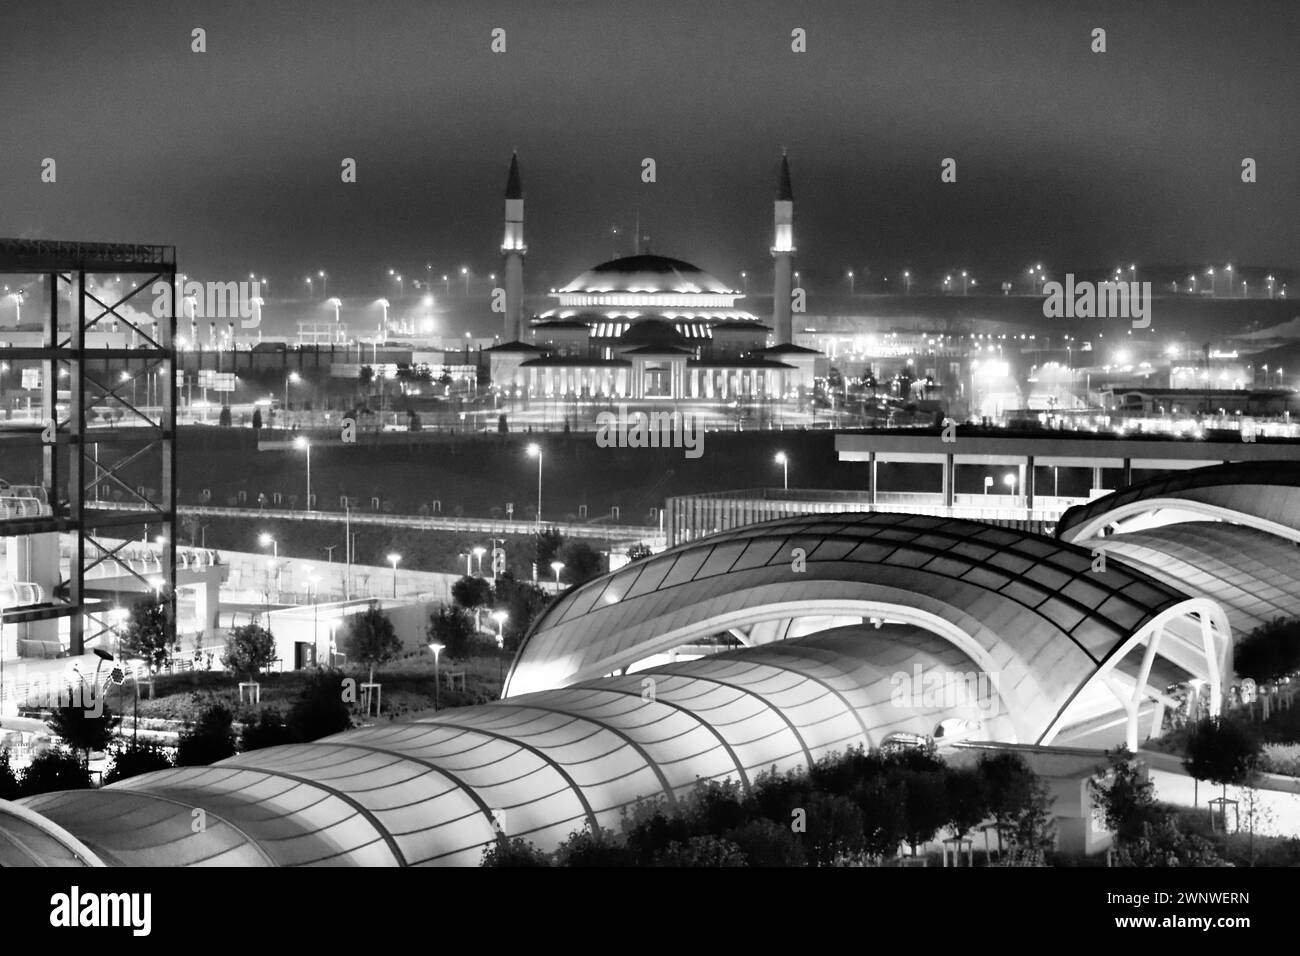 Istanbul, Turkiye 01.01.24: Ali Kuscu Mosque, first structure of Airport City. Night Istanbul, view from IST airport. The large beautiful mosque is Stock Photo